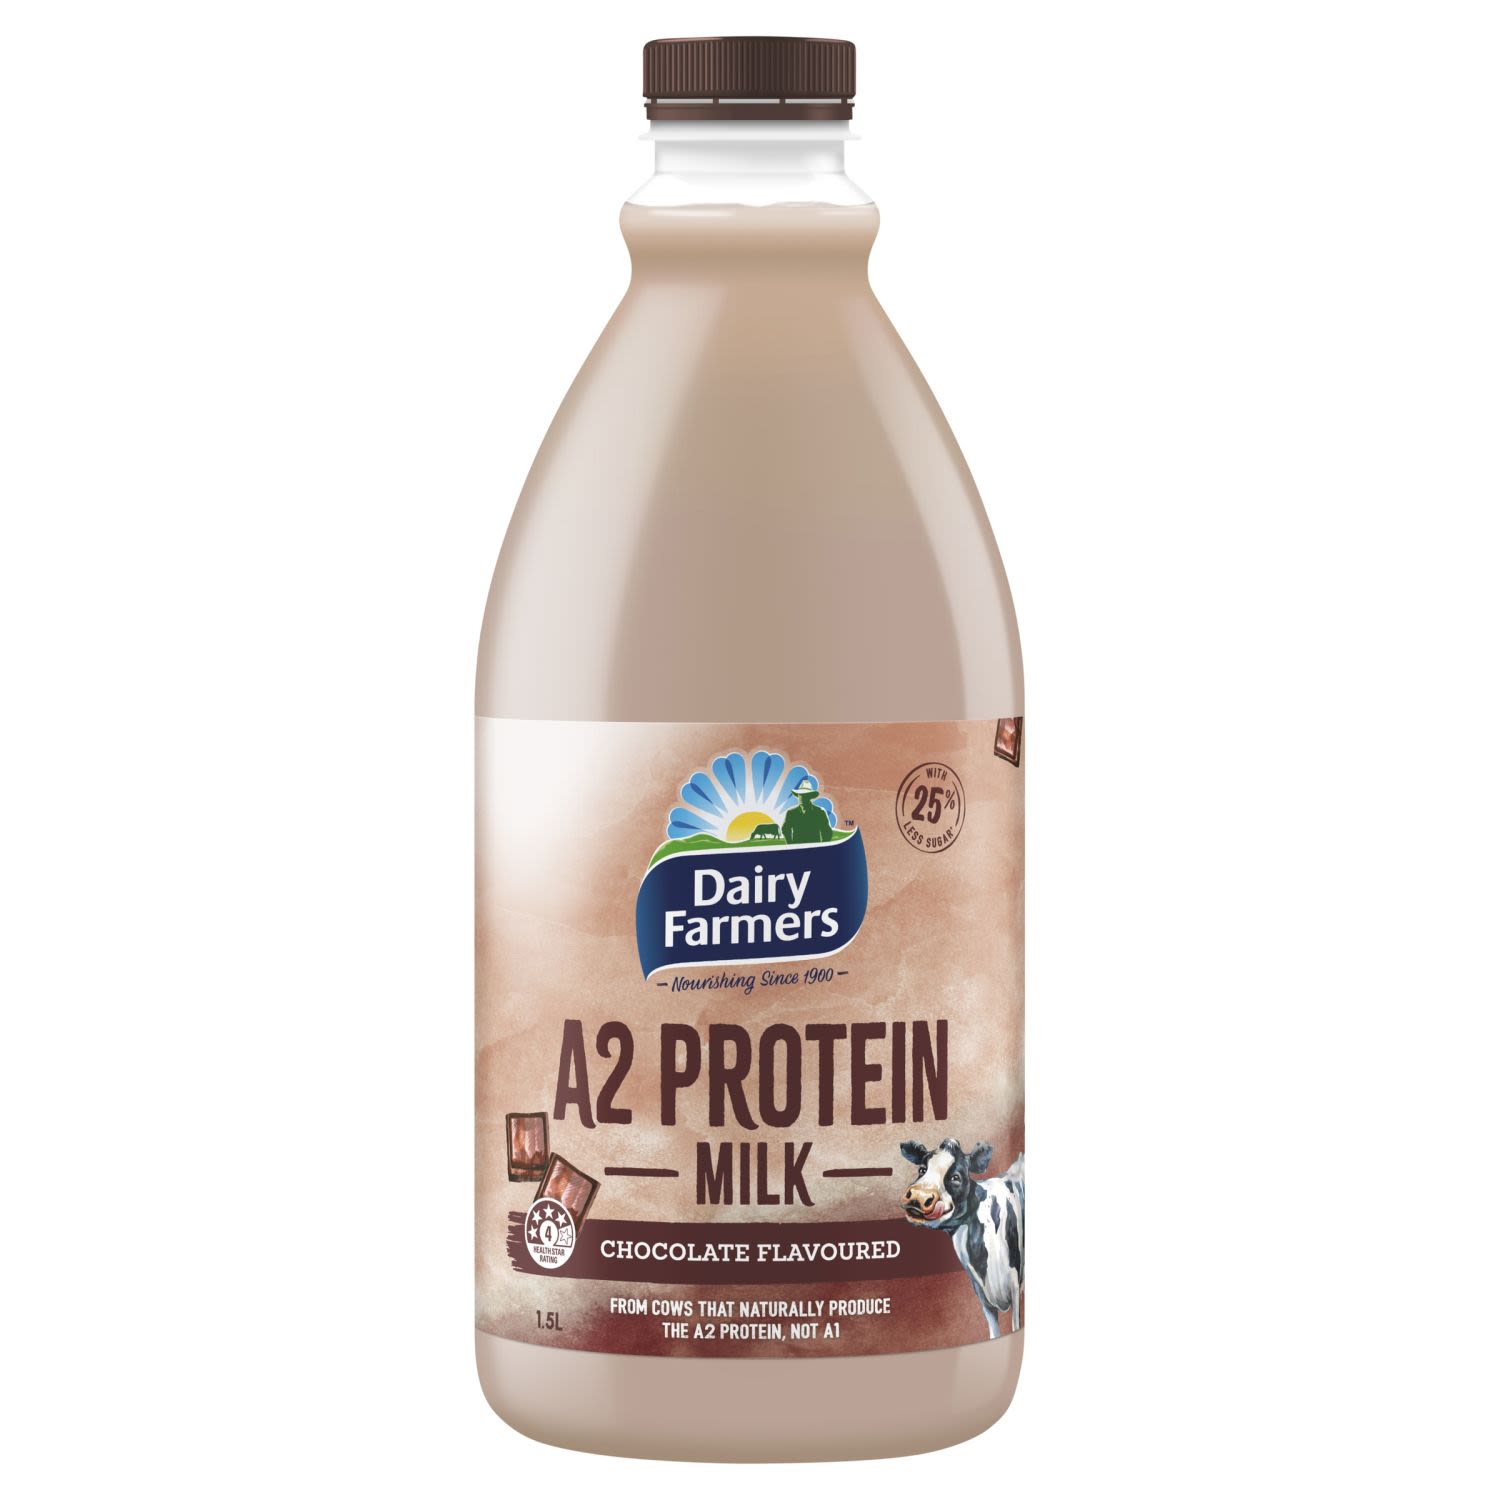 Dairy Farmers A2 Protein Chocolate Flavoured Milk, 1.5 Litre